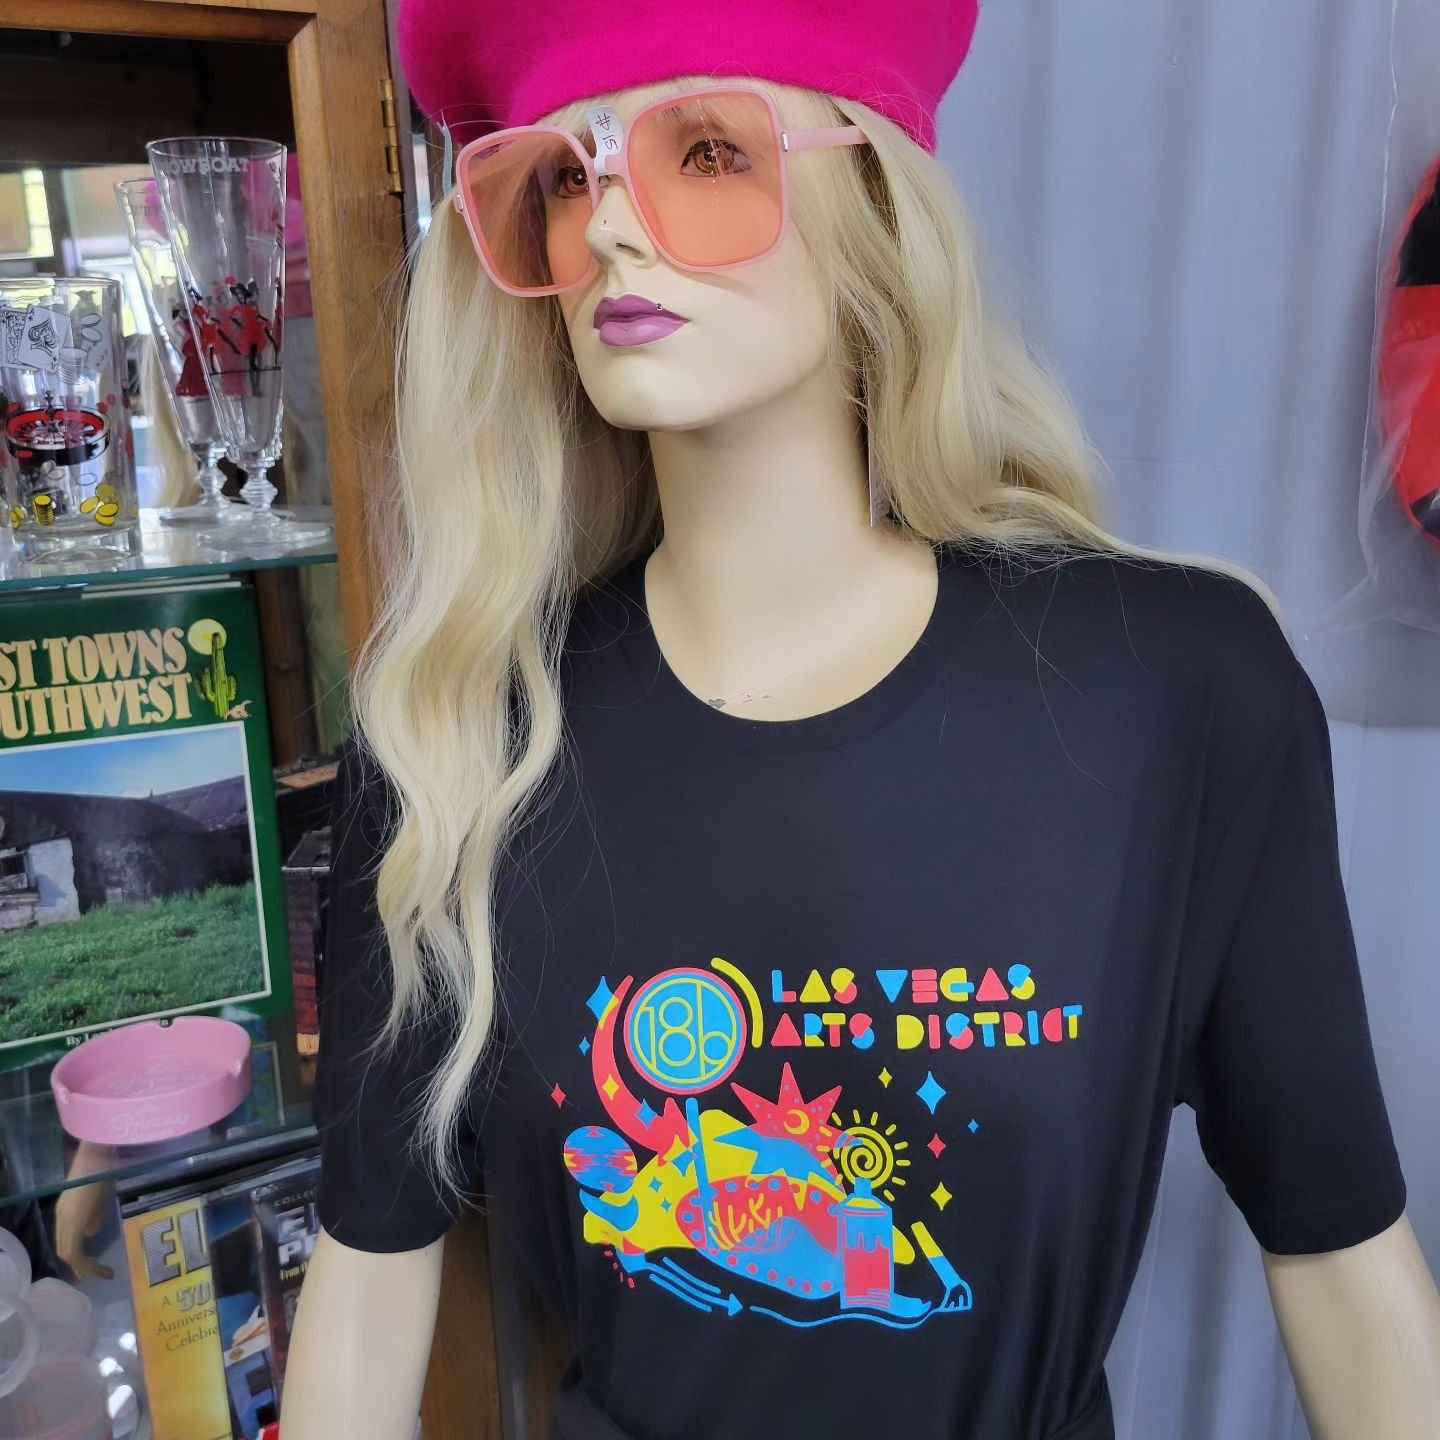 ✨️This shirt is available in our shop✨️
Represent the Art District with this original shirt design. Main Street Peddlers is open 7 days a week!
#18b #DTLV #lasvegasartdistrict #lasvegasnevada #originalart #mainstreetpeddlers #mainstreet #downtownlv #